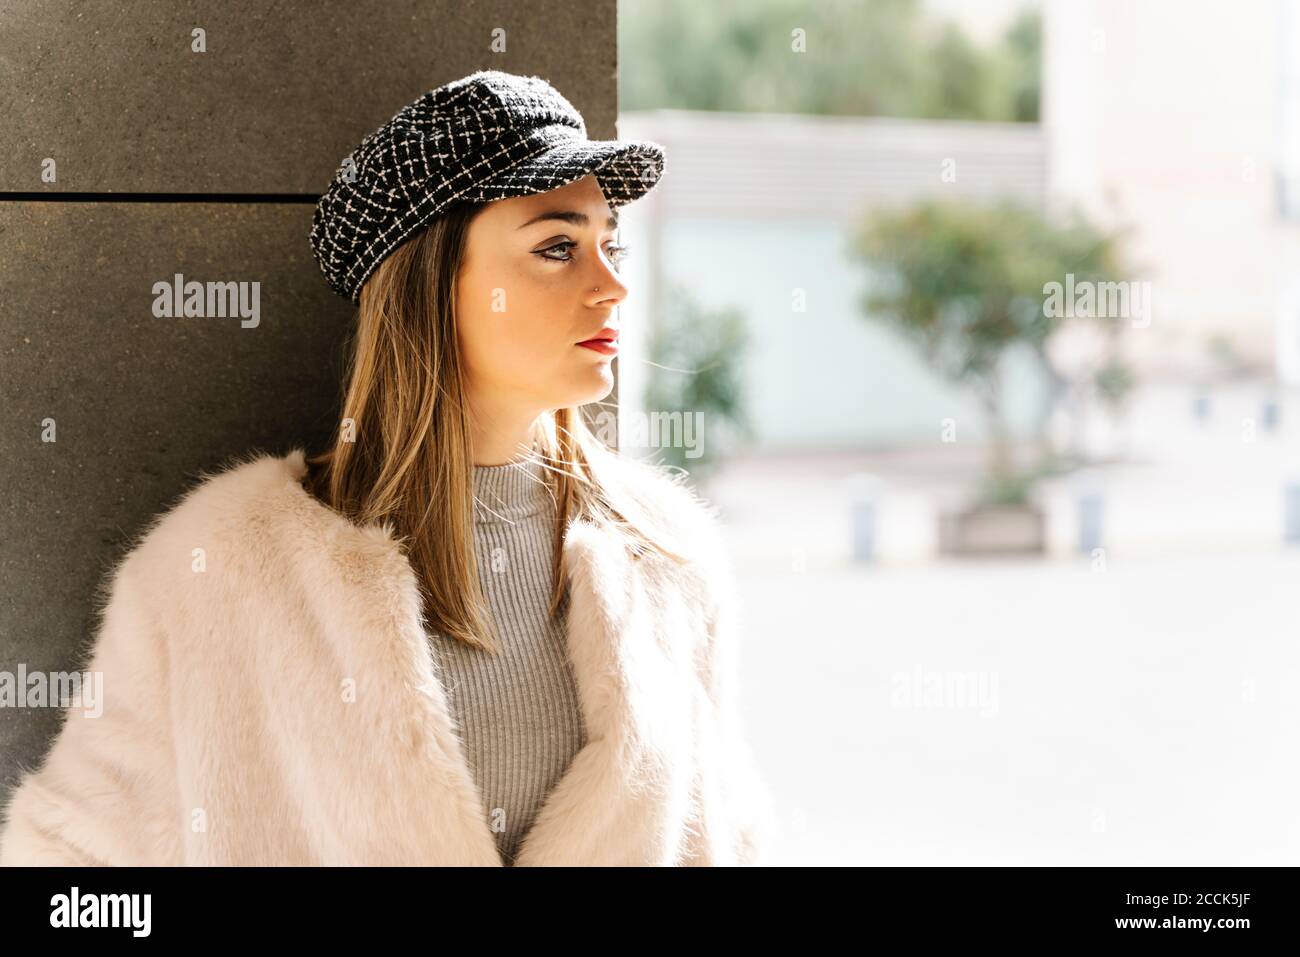 Beautiful woman in jacket looking away against wall Stock Photo